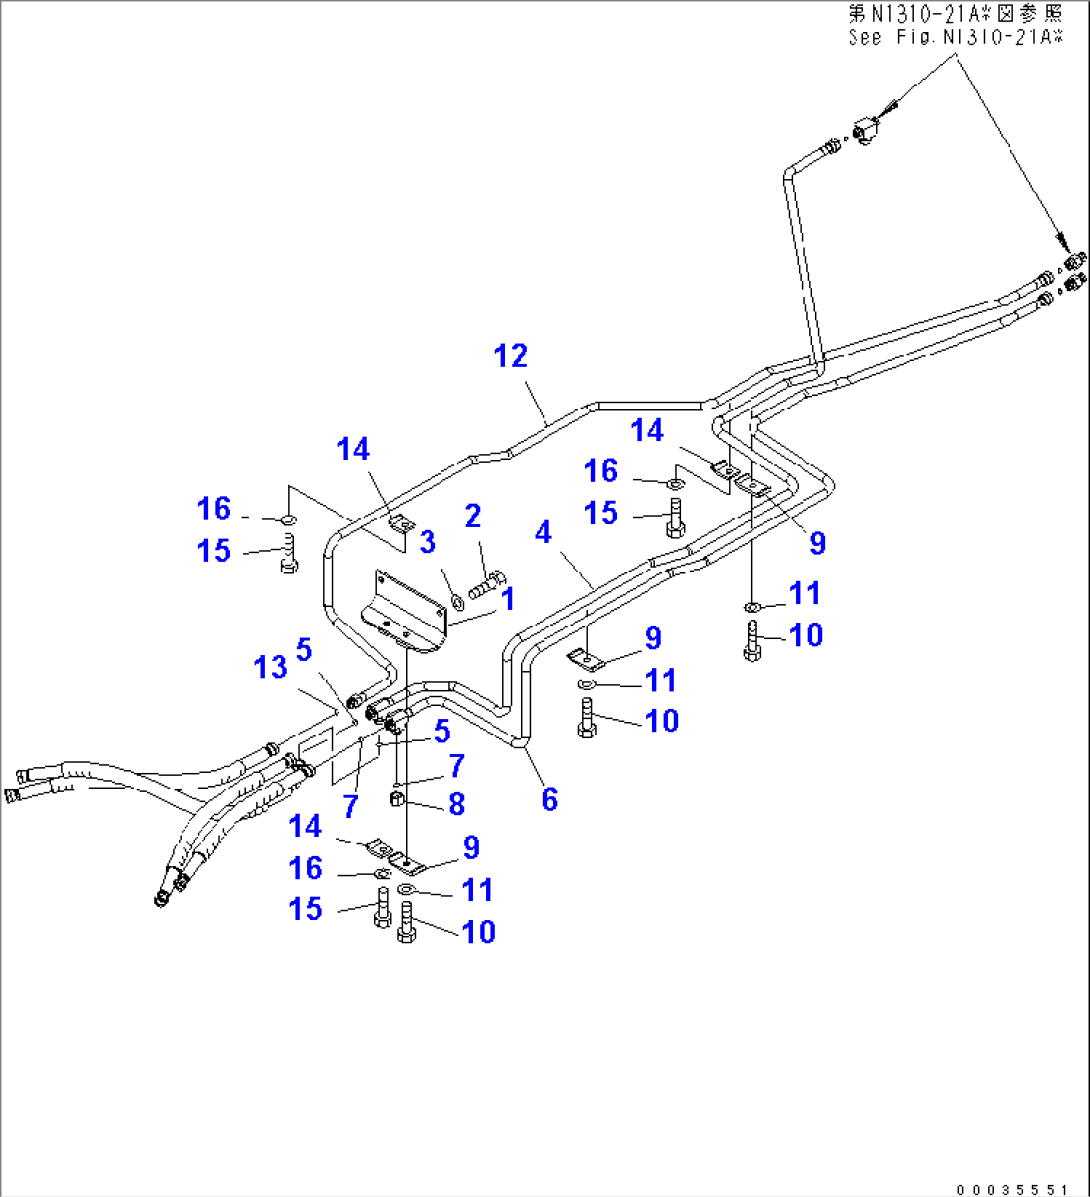 FRONT OUTRIGGER (HYDRAULIC PIPING)